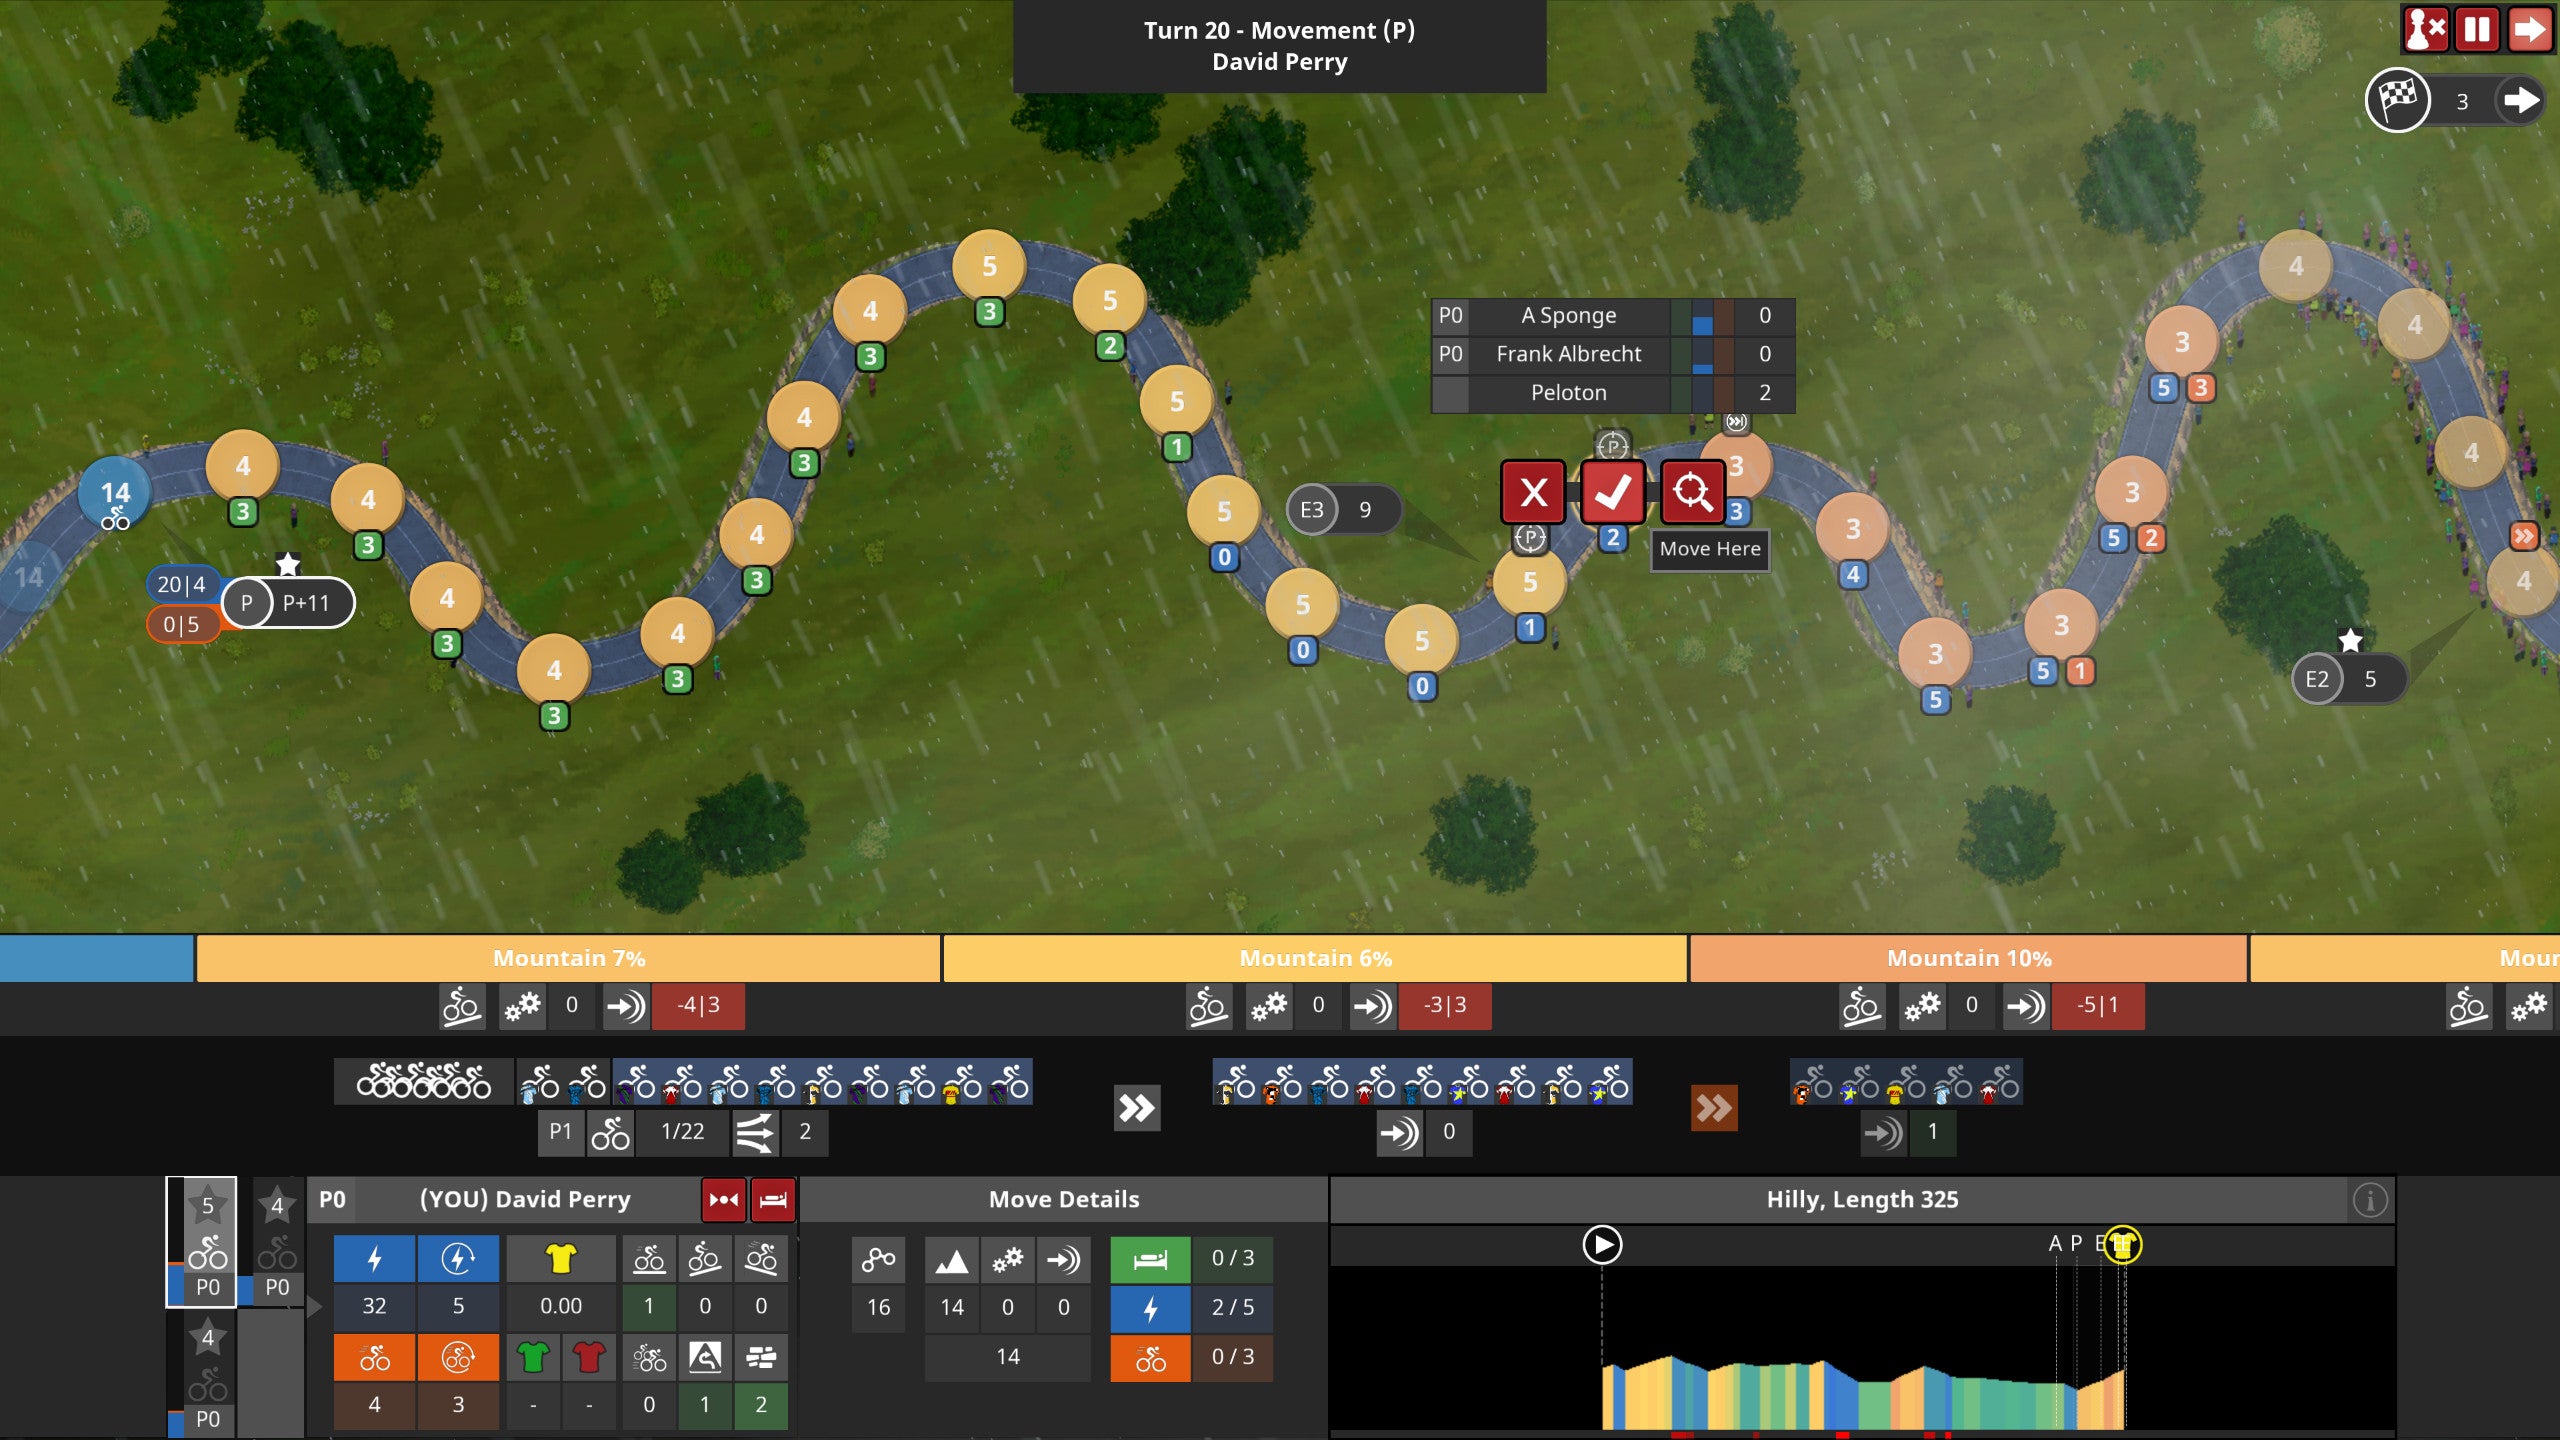 A top-down view of the grueling uphill cycling race in The Cyclist: Tactics screenshot.